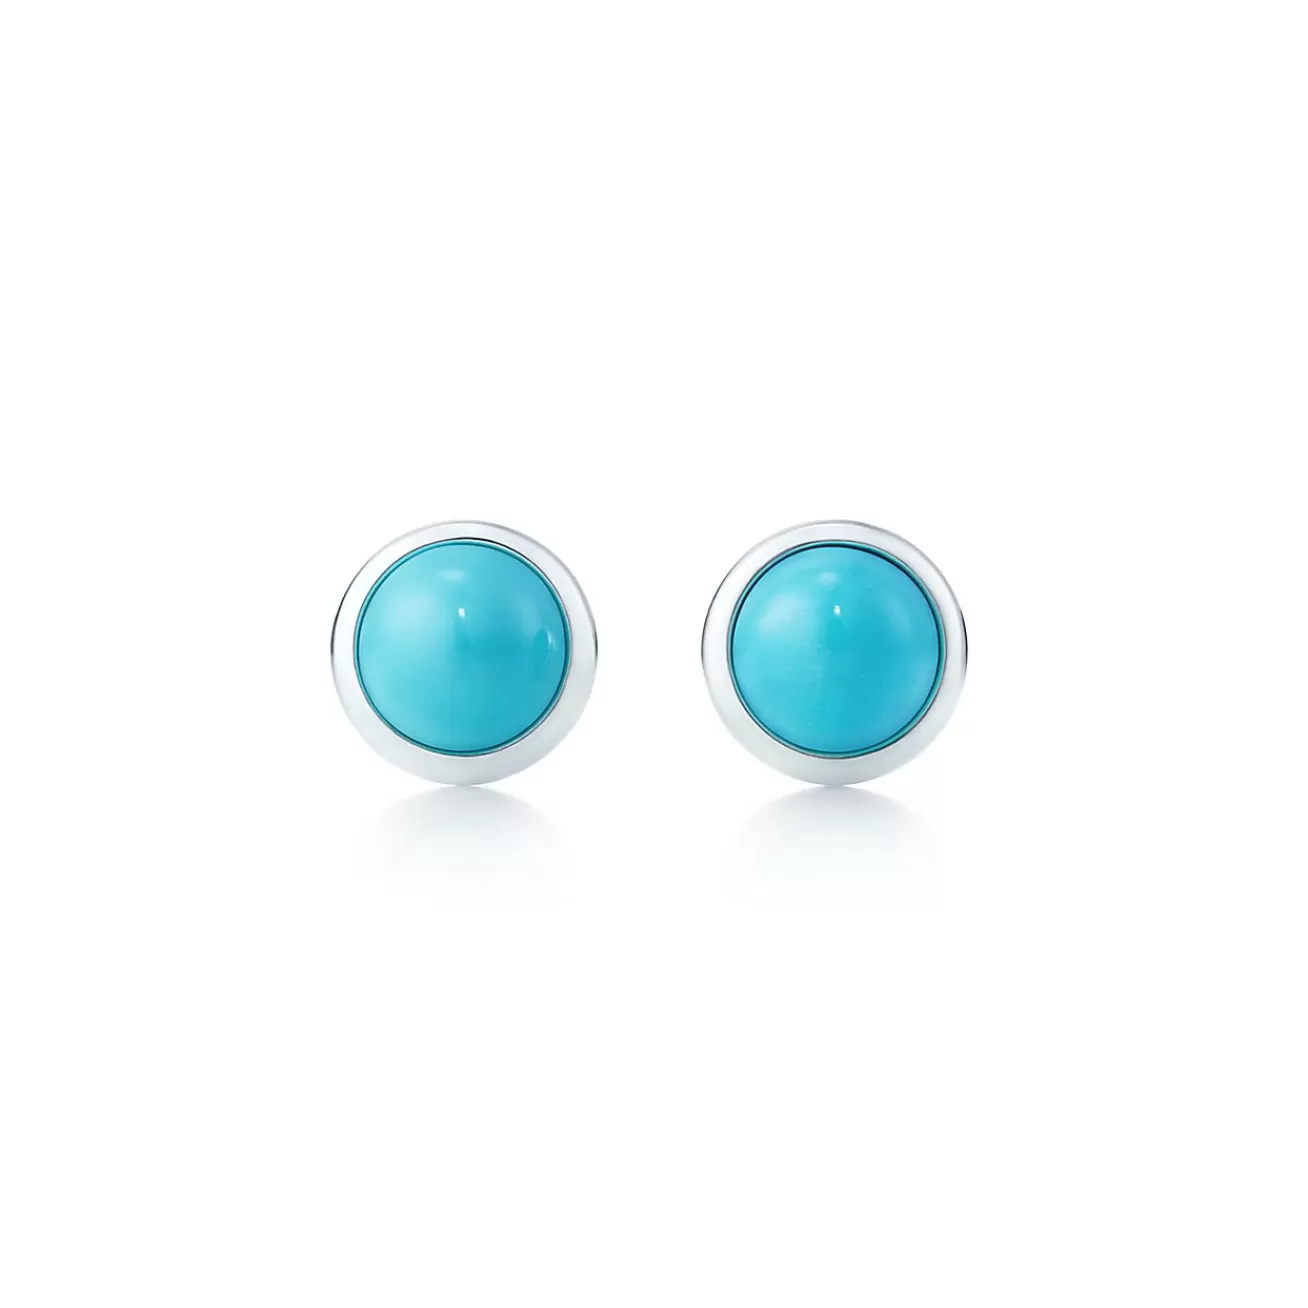 Tiffany & Co. Elsa Peretti® Color by the Yard earrings in silver with turquoise. | ^ Earrings | Sterling Silver Jewelry